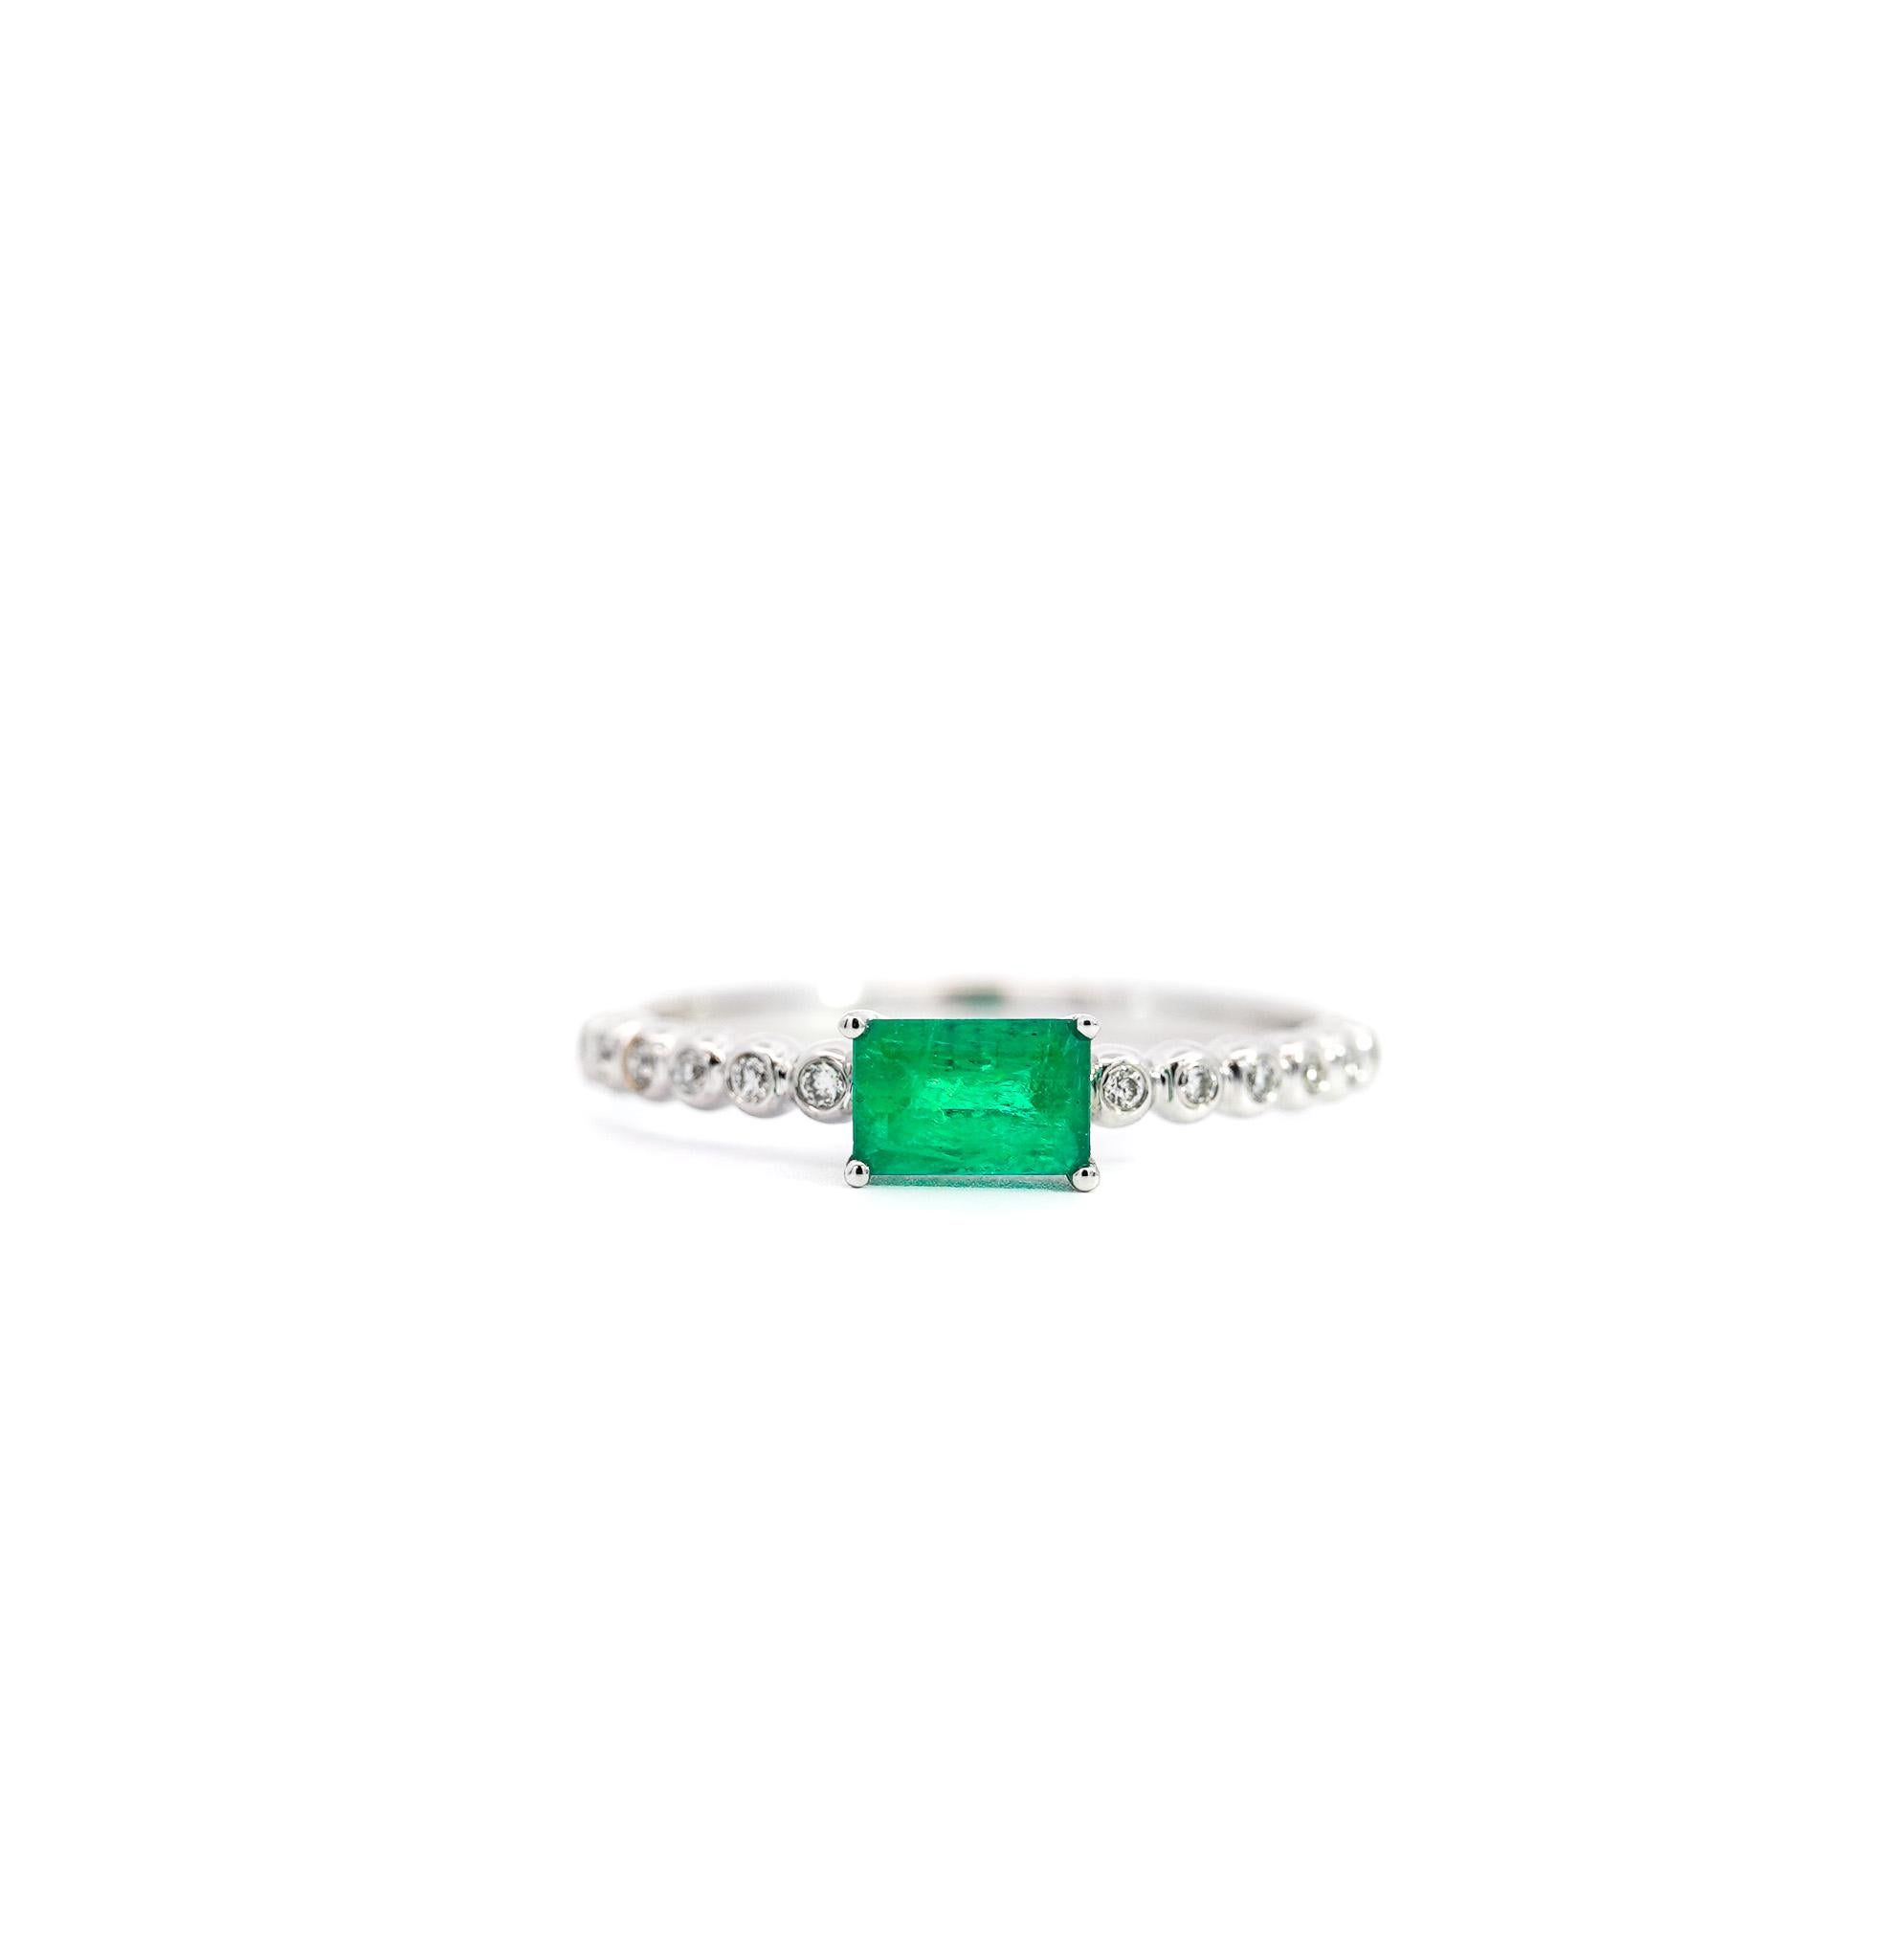 Natural Green Emerald and Natural Diamond Stacking Ring, Set in 18K White Gold.

Featuring a textured ribbed bezel set of diamond side stones and a vivid emerald cut Green Emerald. Dainty 2mm thin band makes it ideal as a stacked ring or worn alone.